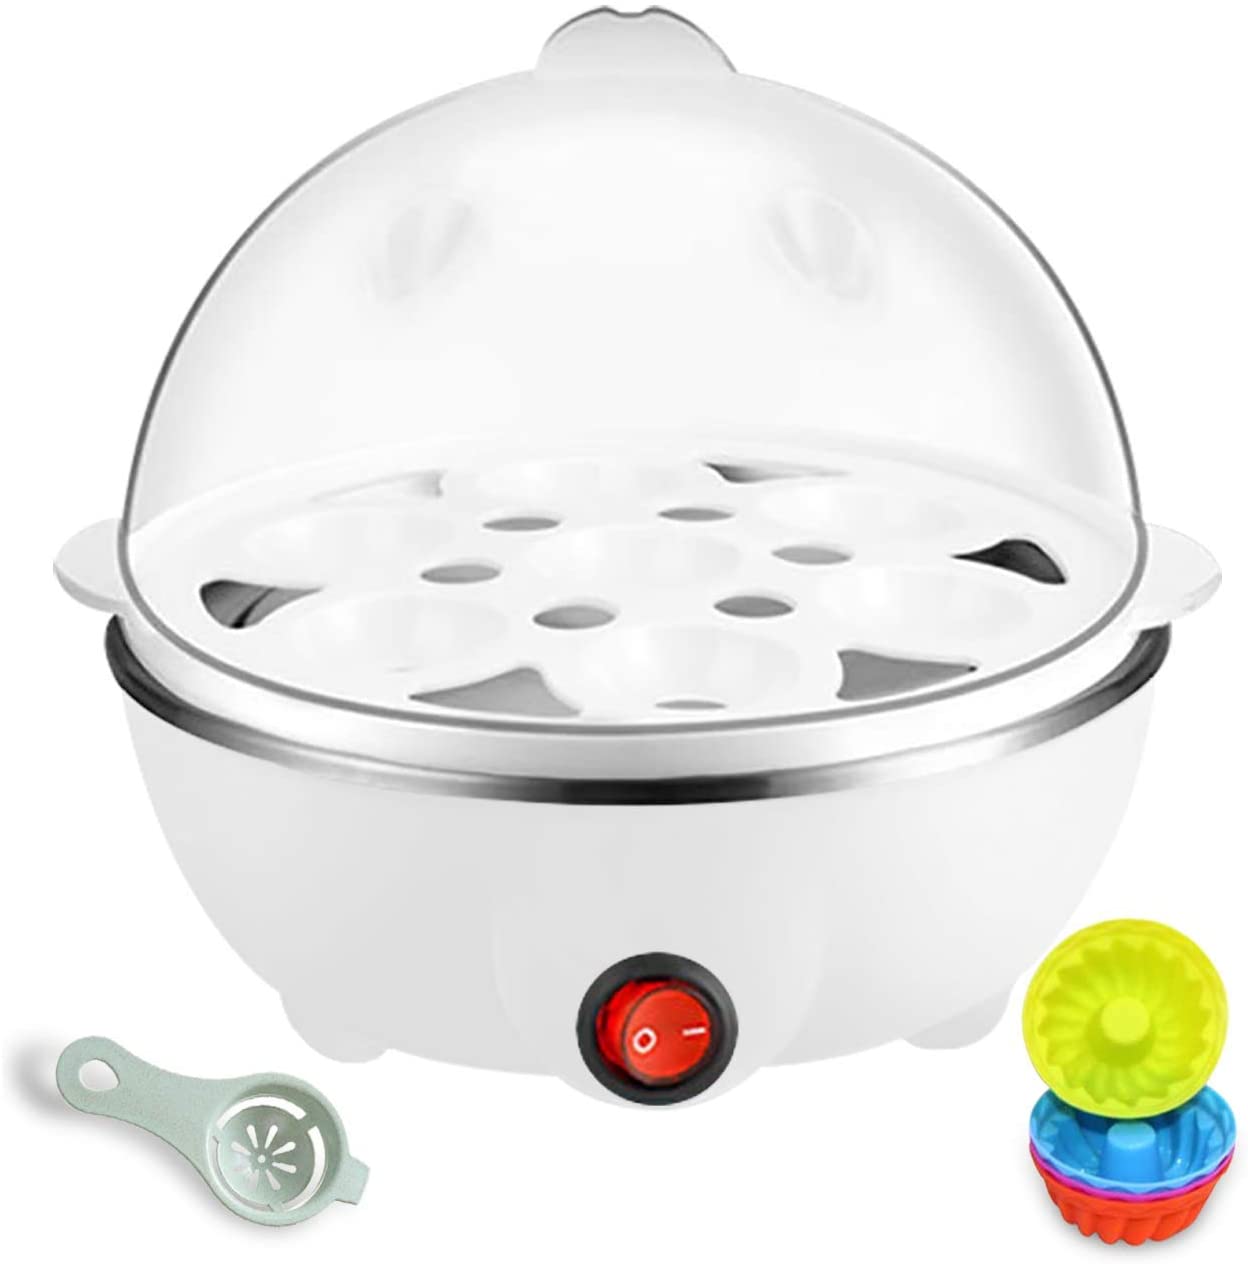 readleaf Electric Egg Boiler Easy Electric Egg Poacher with Automatic Shut-Off, Capacity 1-7 Eggs, BPA-Free (White)